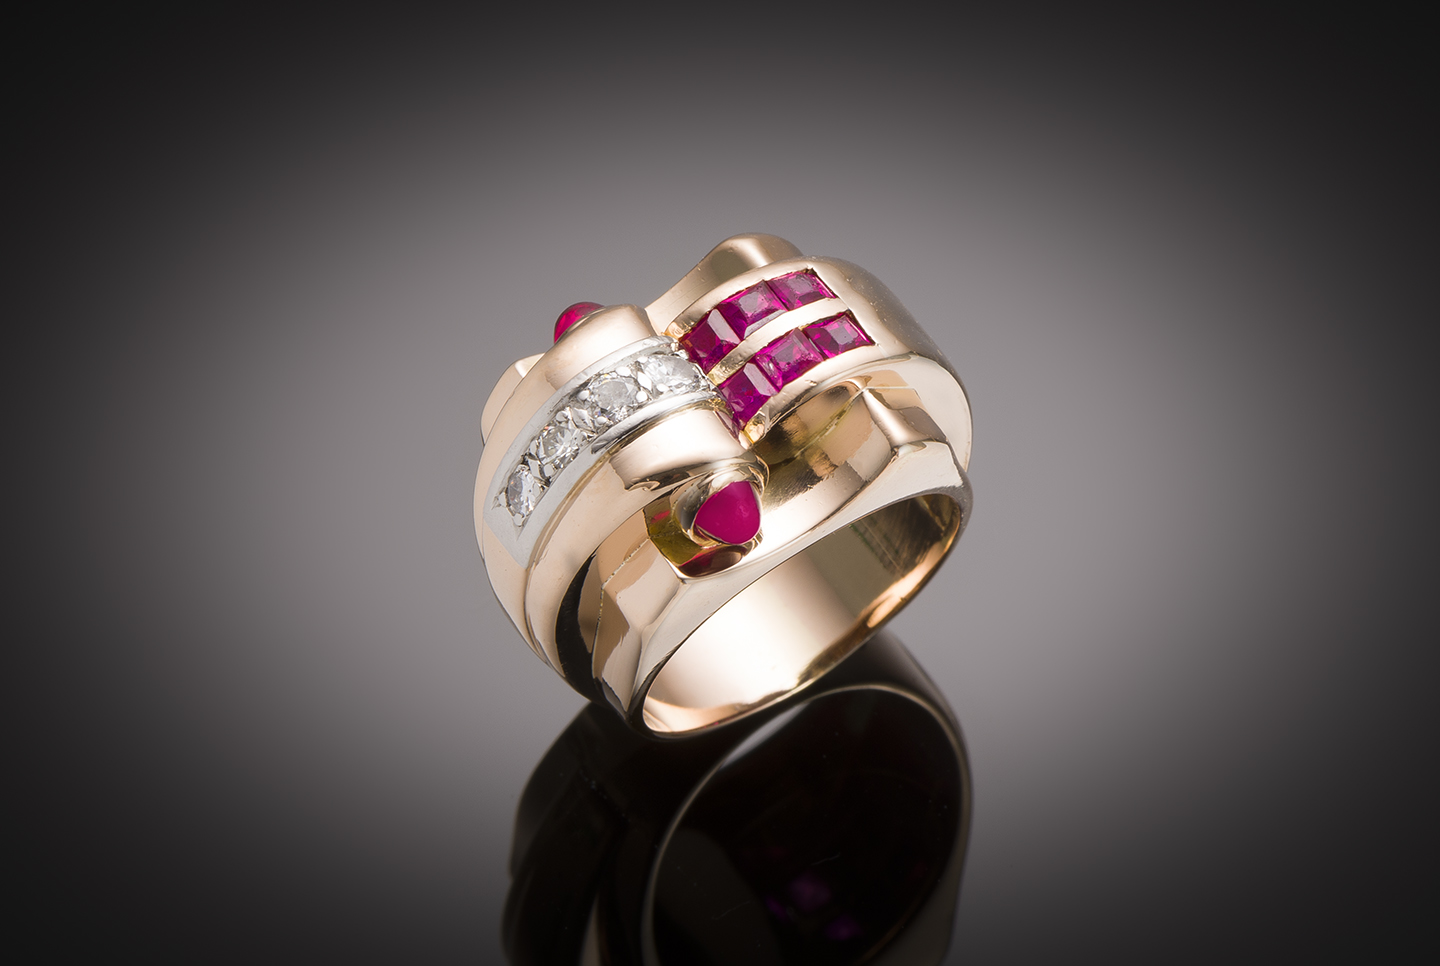 French diamond and ruby ring circa 1940-1